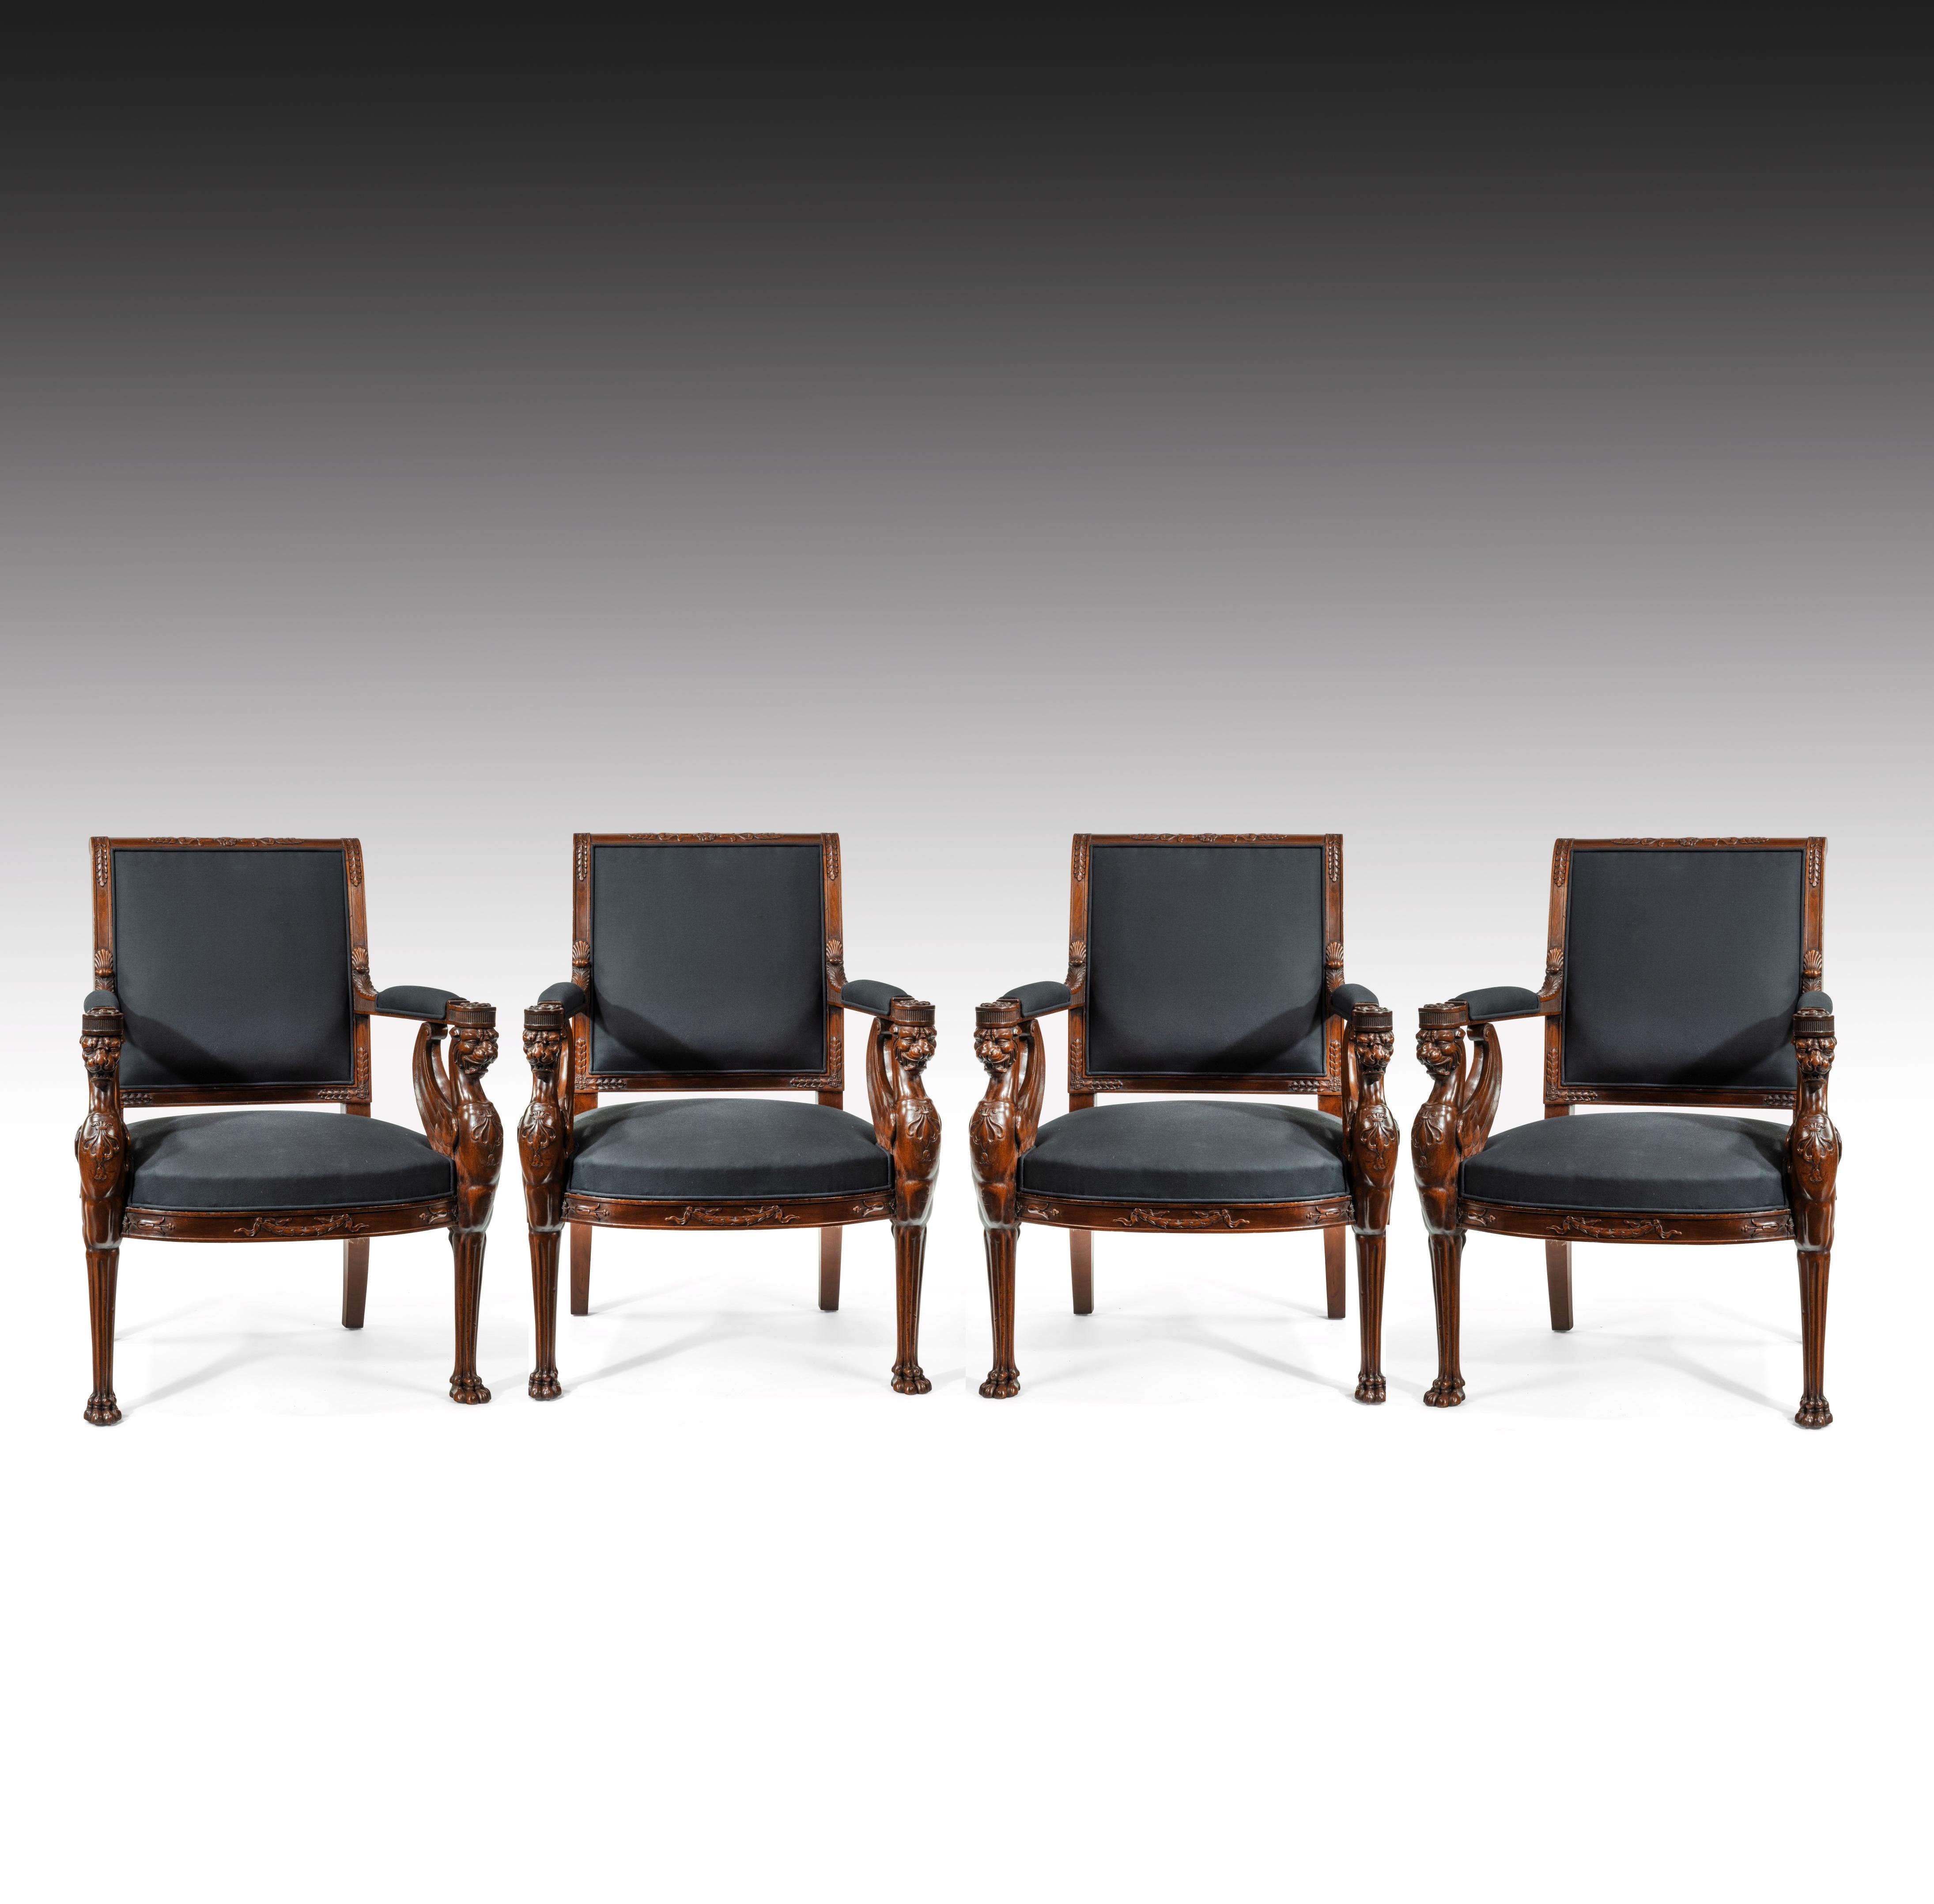 An extremely fine and well executed set of four, carved mahogany Empire period open fauteuils, upholstered in a black calico, by repute from a Royal collection.

European, circa 1810.

The gently raked, out-scrolled rectangular backs, with